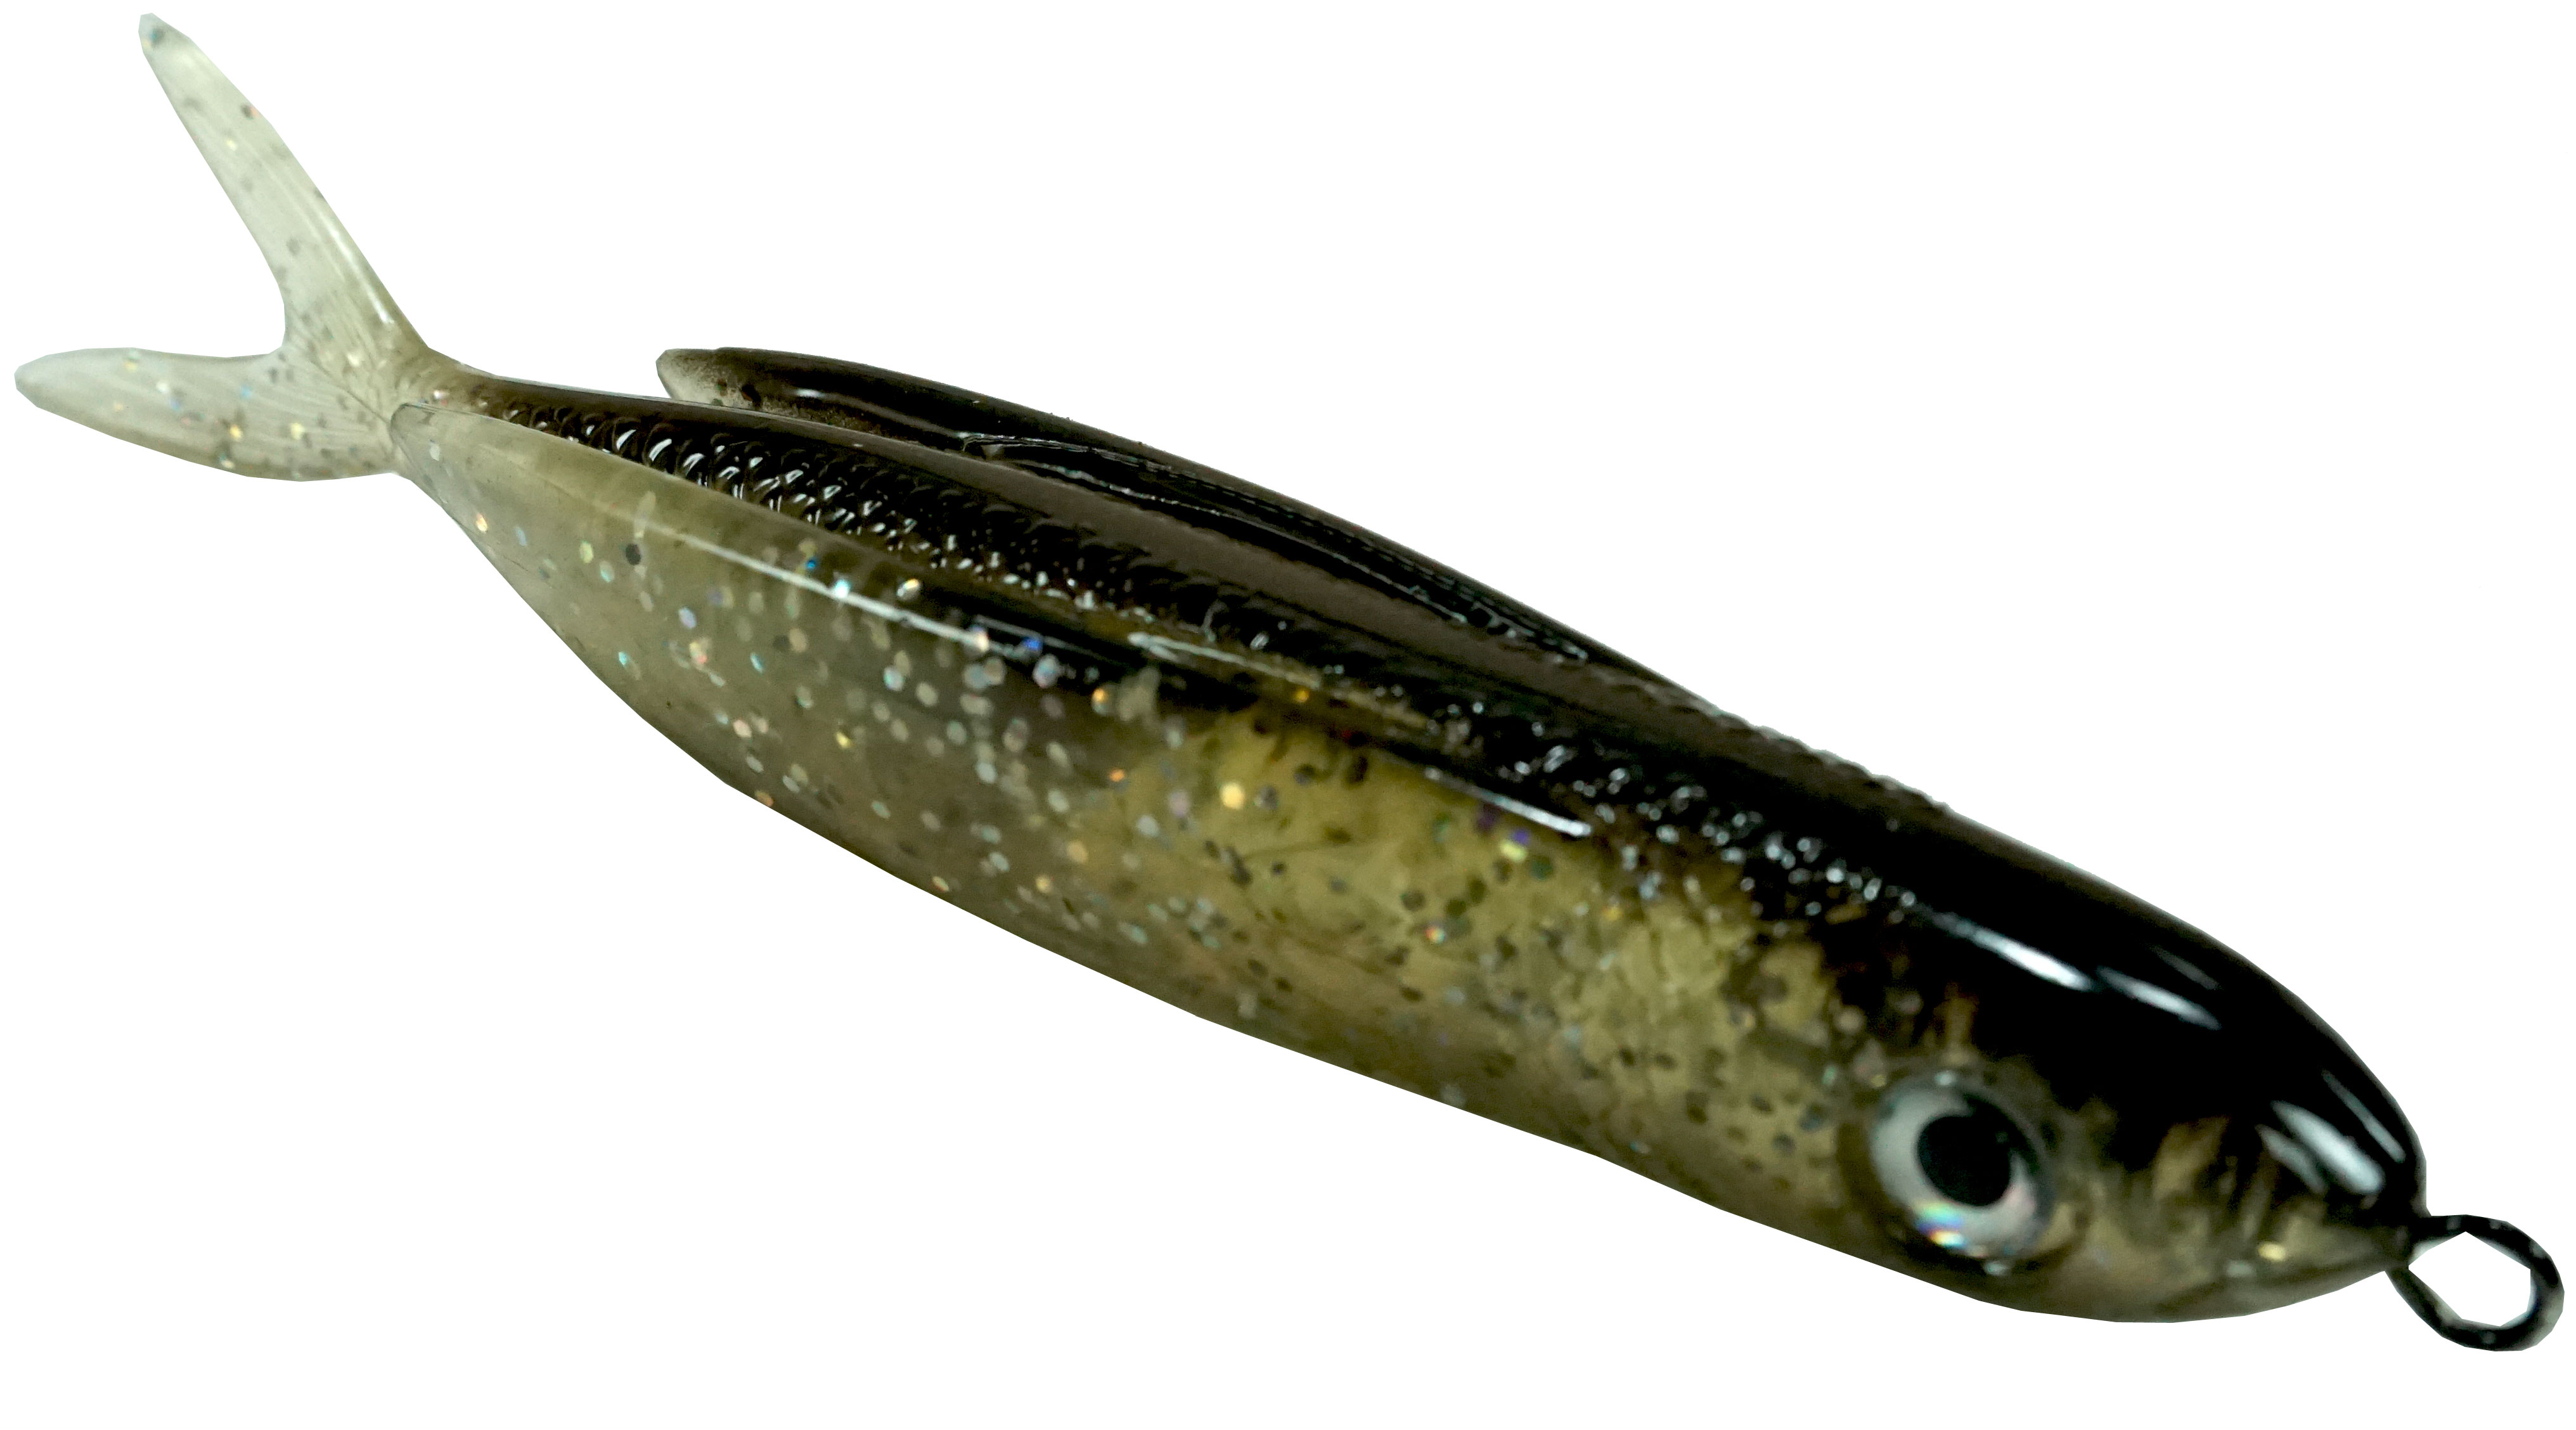 Almost Alive Lures 8.5" Soft Plastic Flying Fish with Swept Back Wing Bait Black/Clear/Glitter with Spring